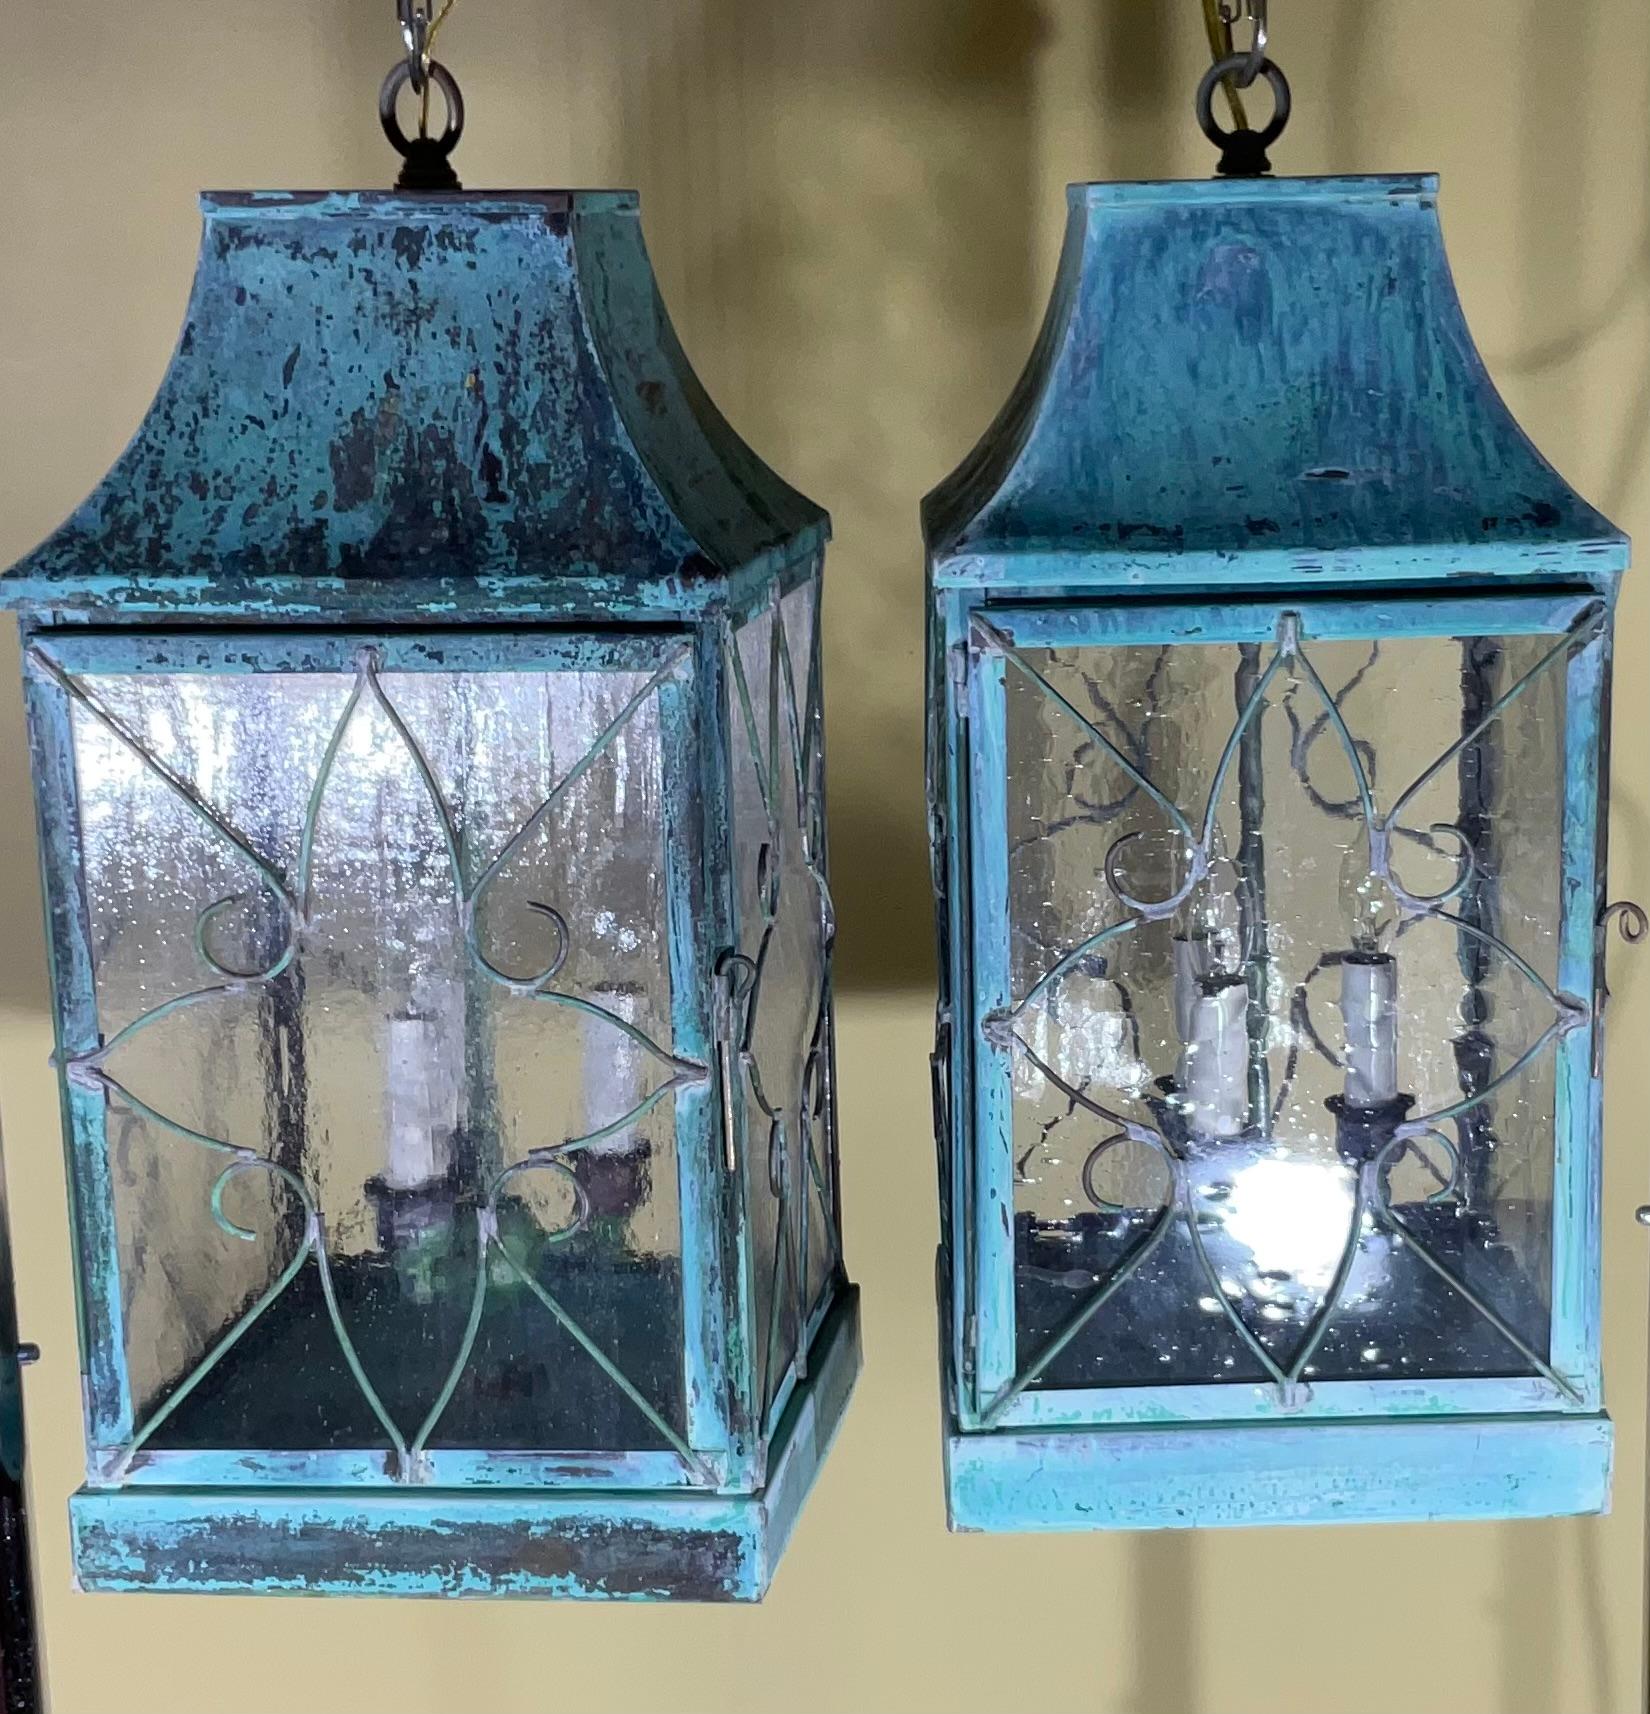 Hand-Crafted Pair Of Vintage Square Handcrafted Copper Hanging Lanterns For Sale